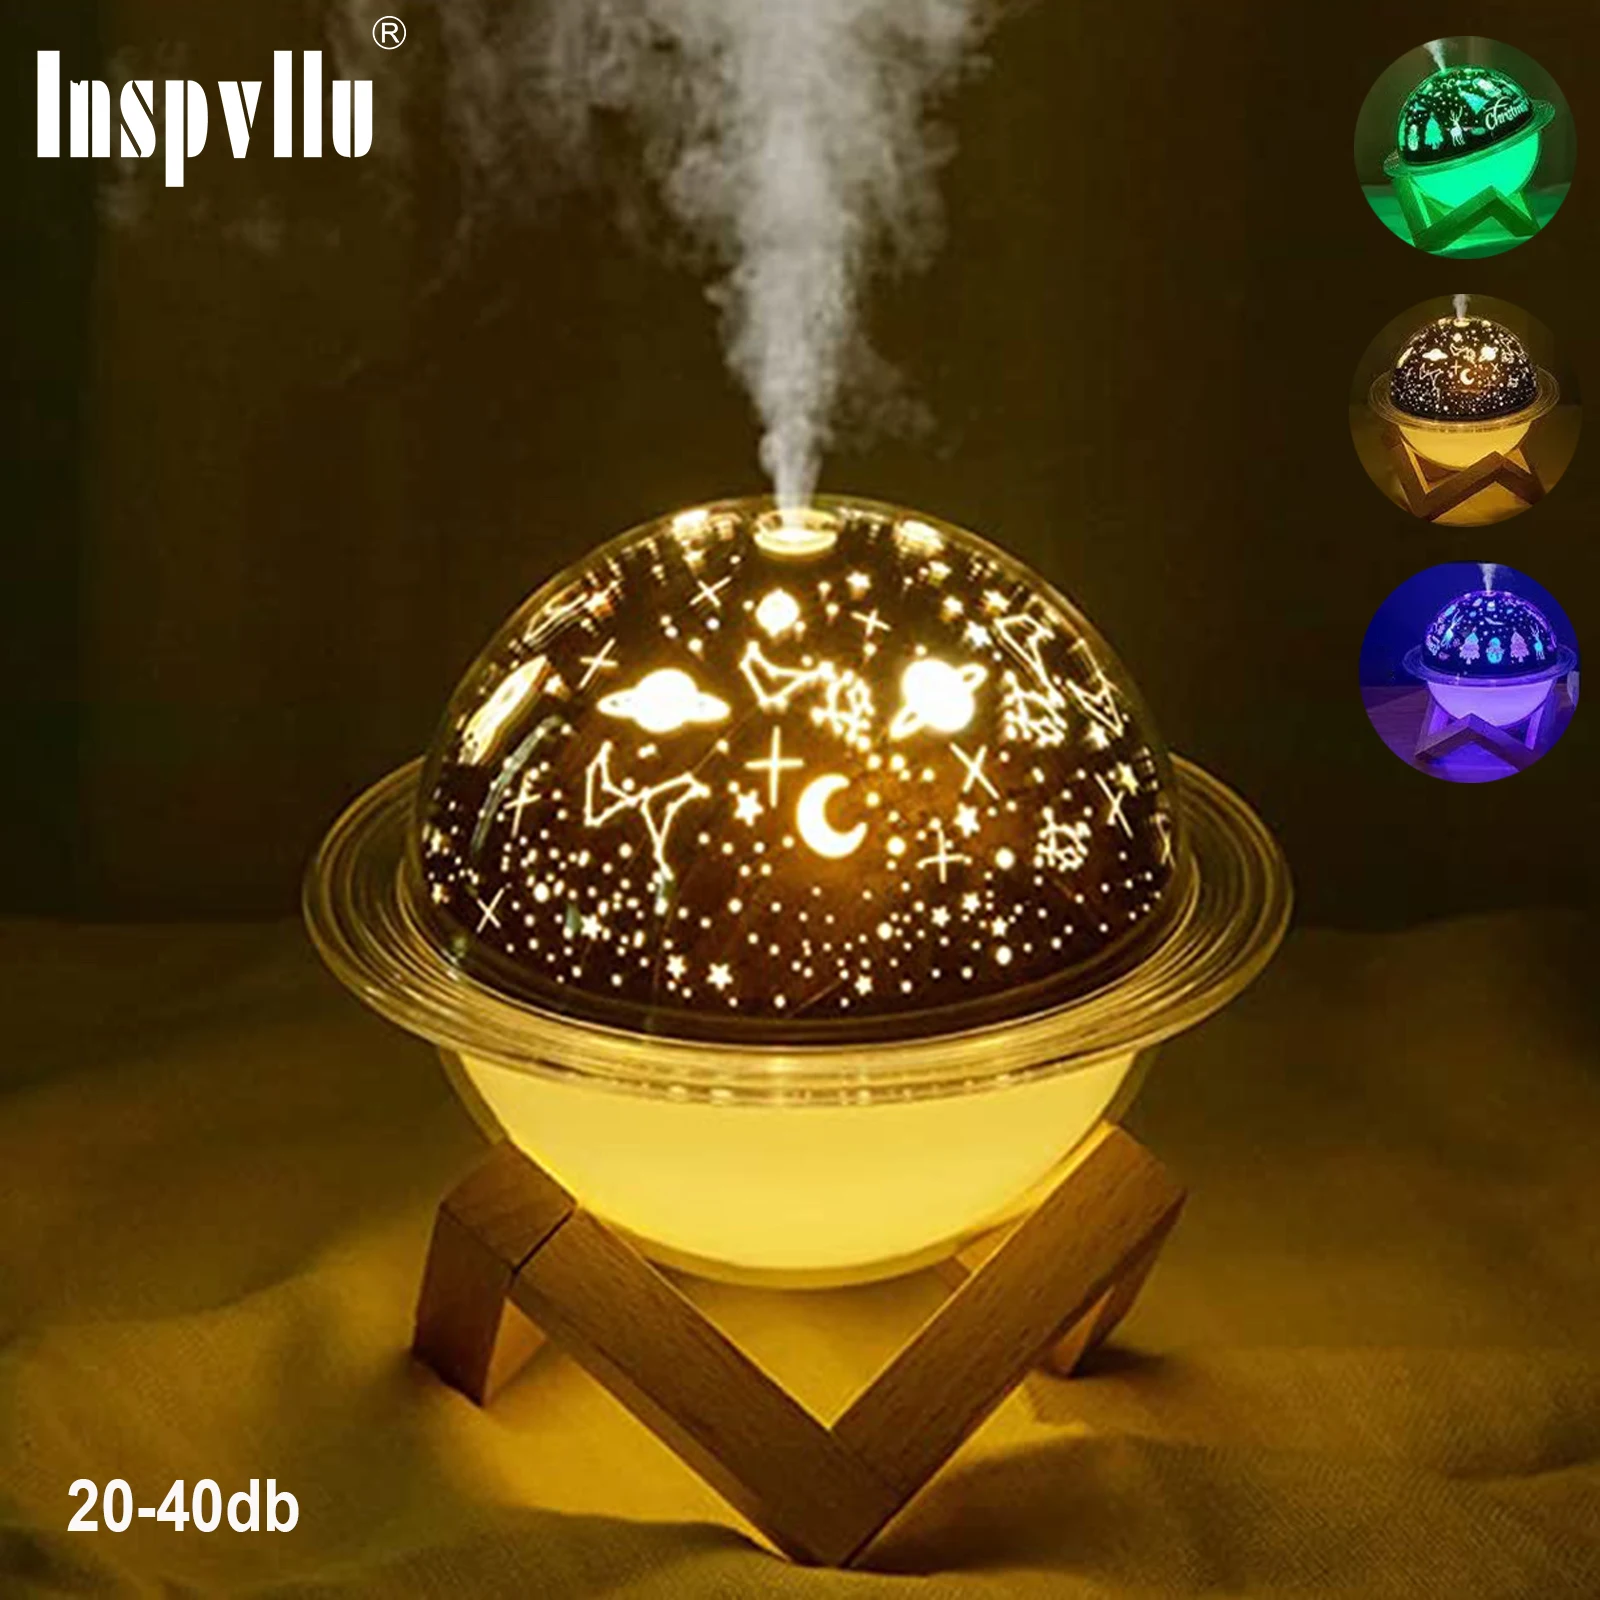 

Portable Mini Air Humidifier Diffuser 2 Mist Modes Waterless Auto-Off Aromatherapy Diffuser for Home Baby Bedroom Travel Xmas